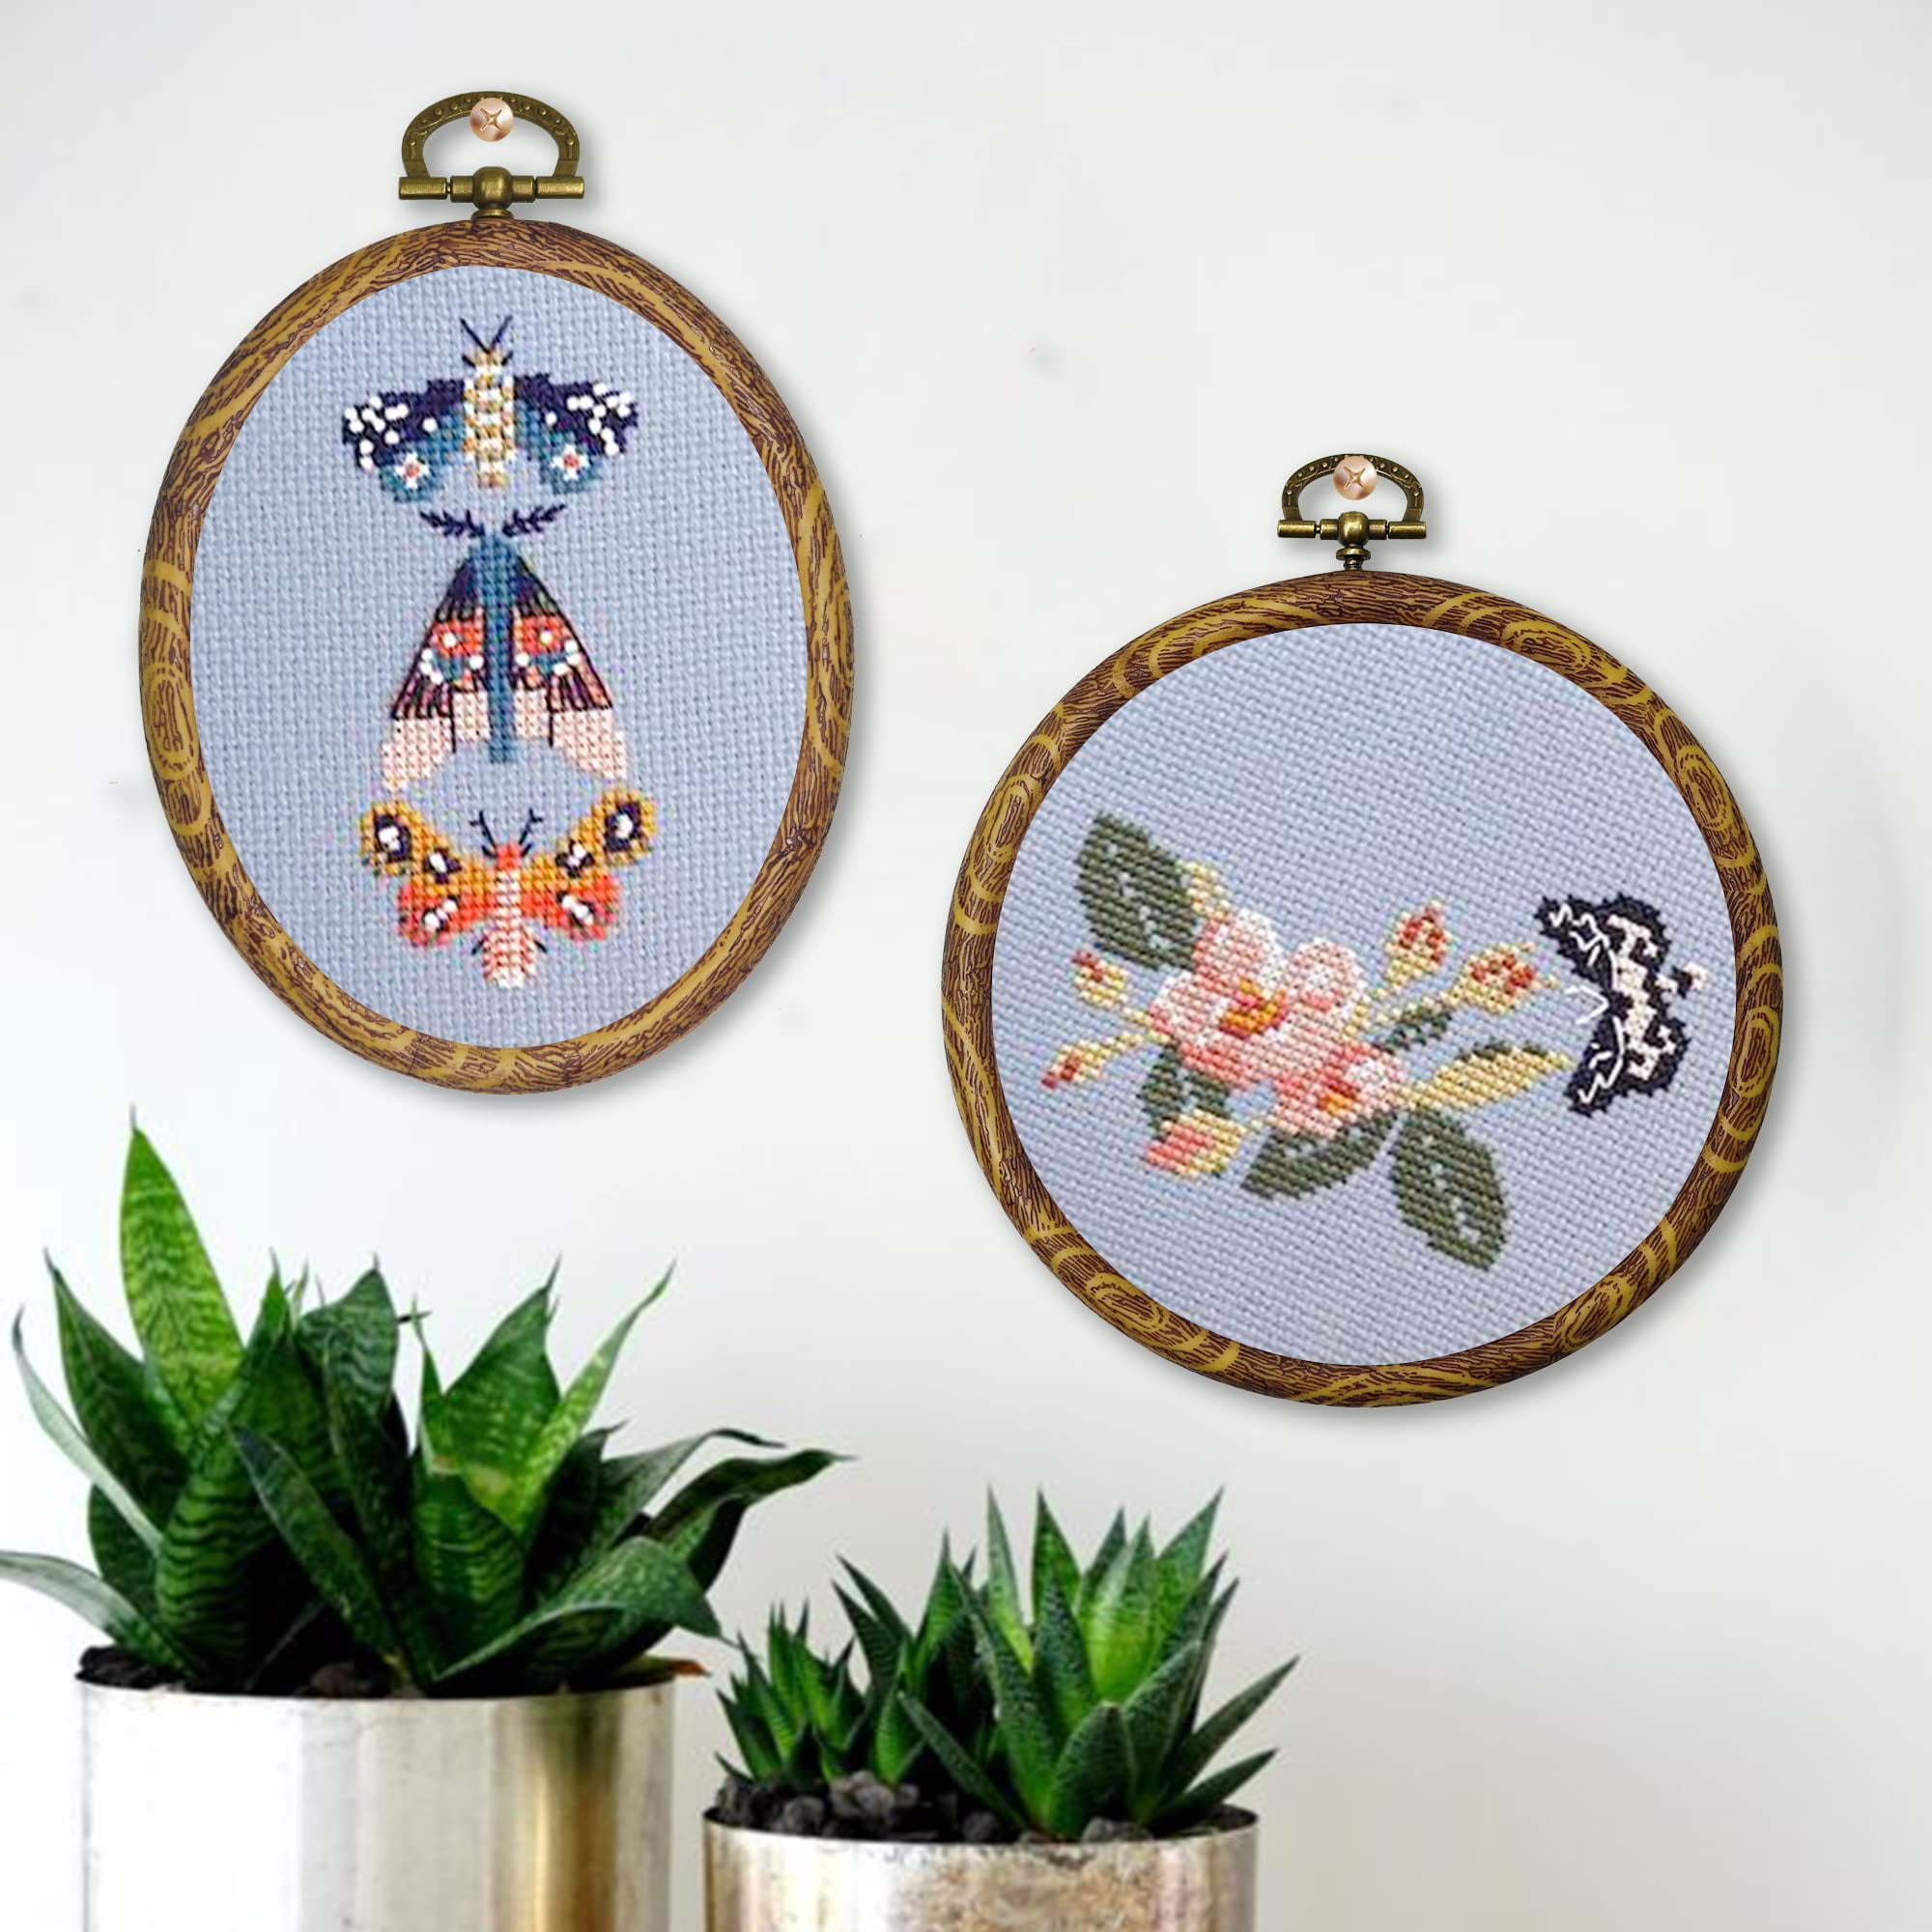  4 Pieces 4 Sizes Embroidery Hoops 4 inch to 8 inch Circle Cross  Stitch Hoop Mini Small Medium Lager Embroidery Frames Imitated Wood Plastic  Decorative Ring for DIY Christmas Sewing Art Crafts